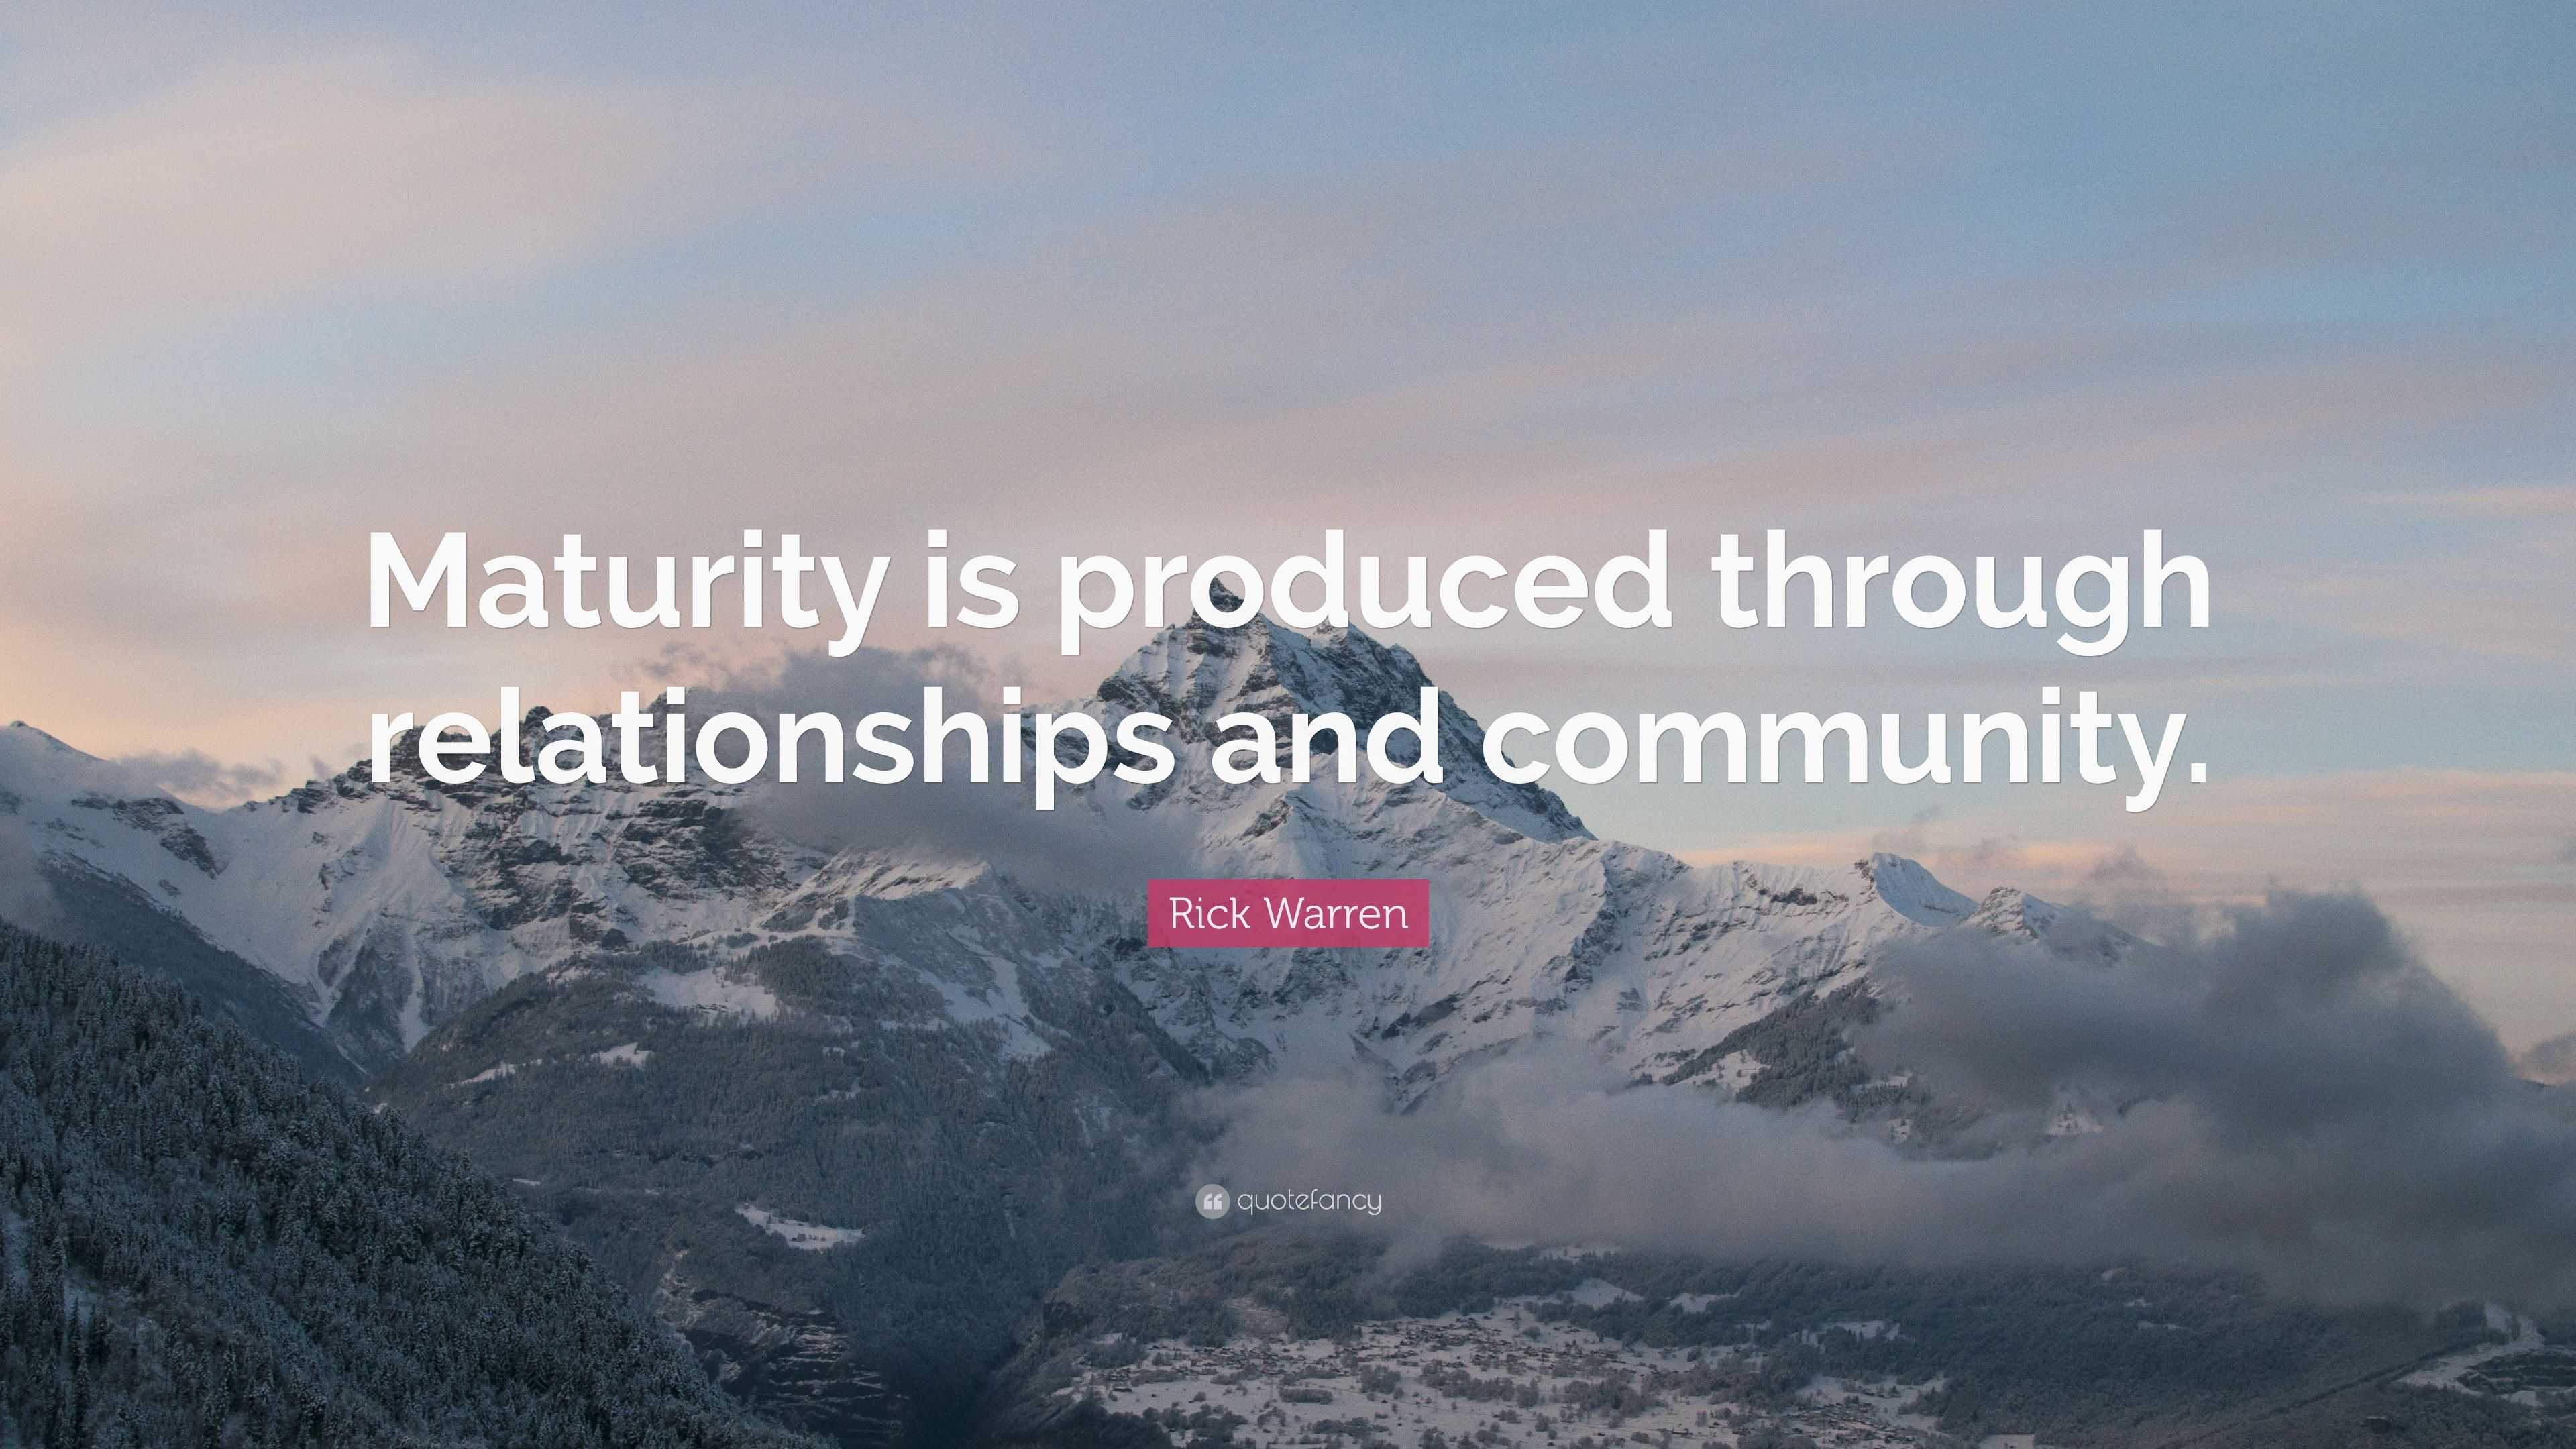 Rick Warren Quote “Maturity is produced through